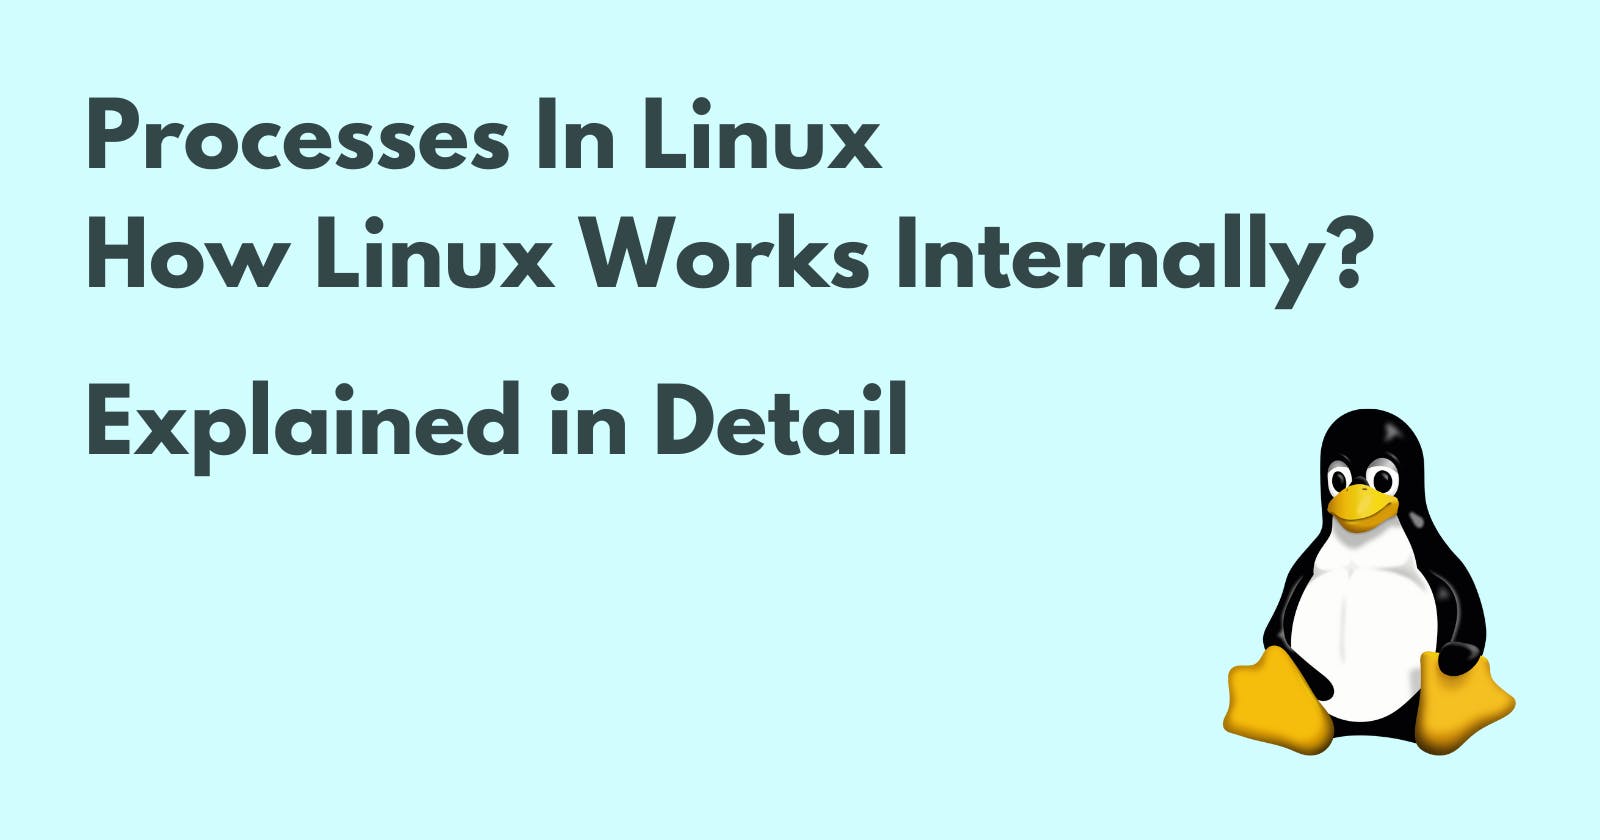 Processes In Linux - How Linux Works Internally? Explained in Detail